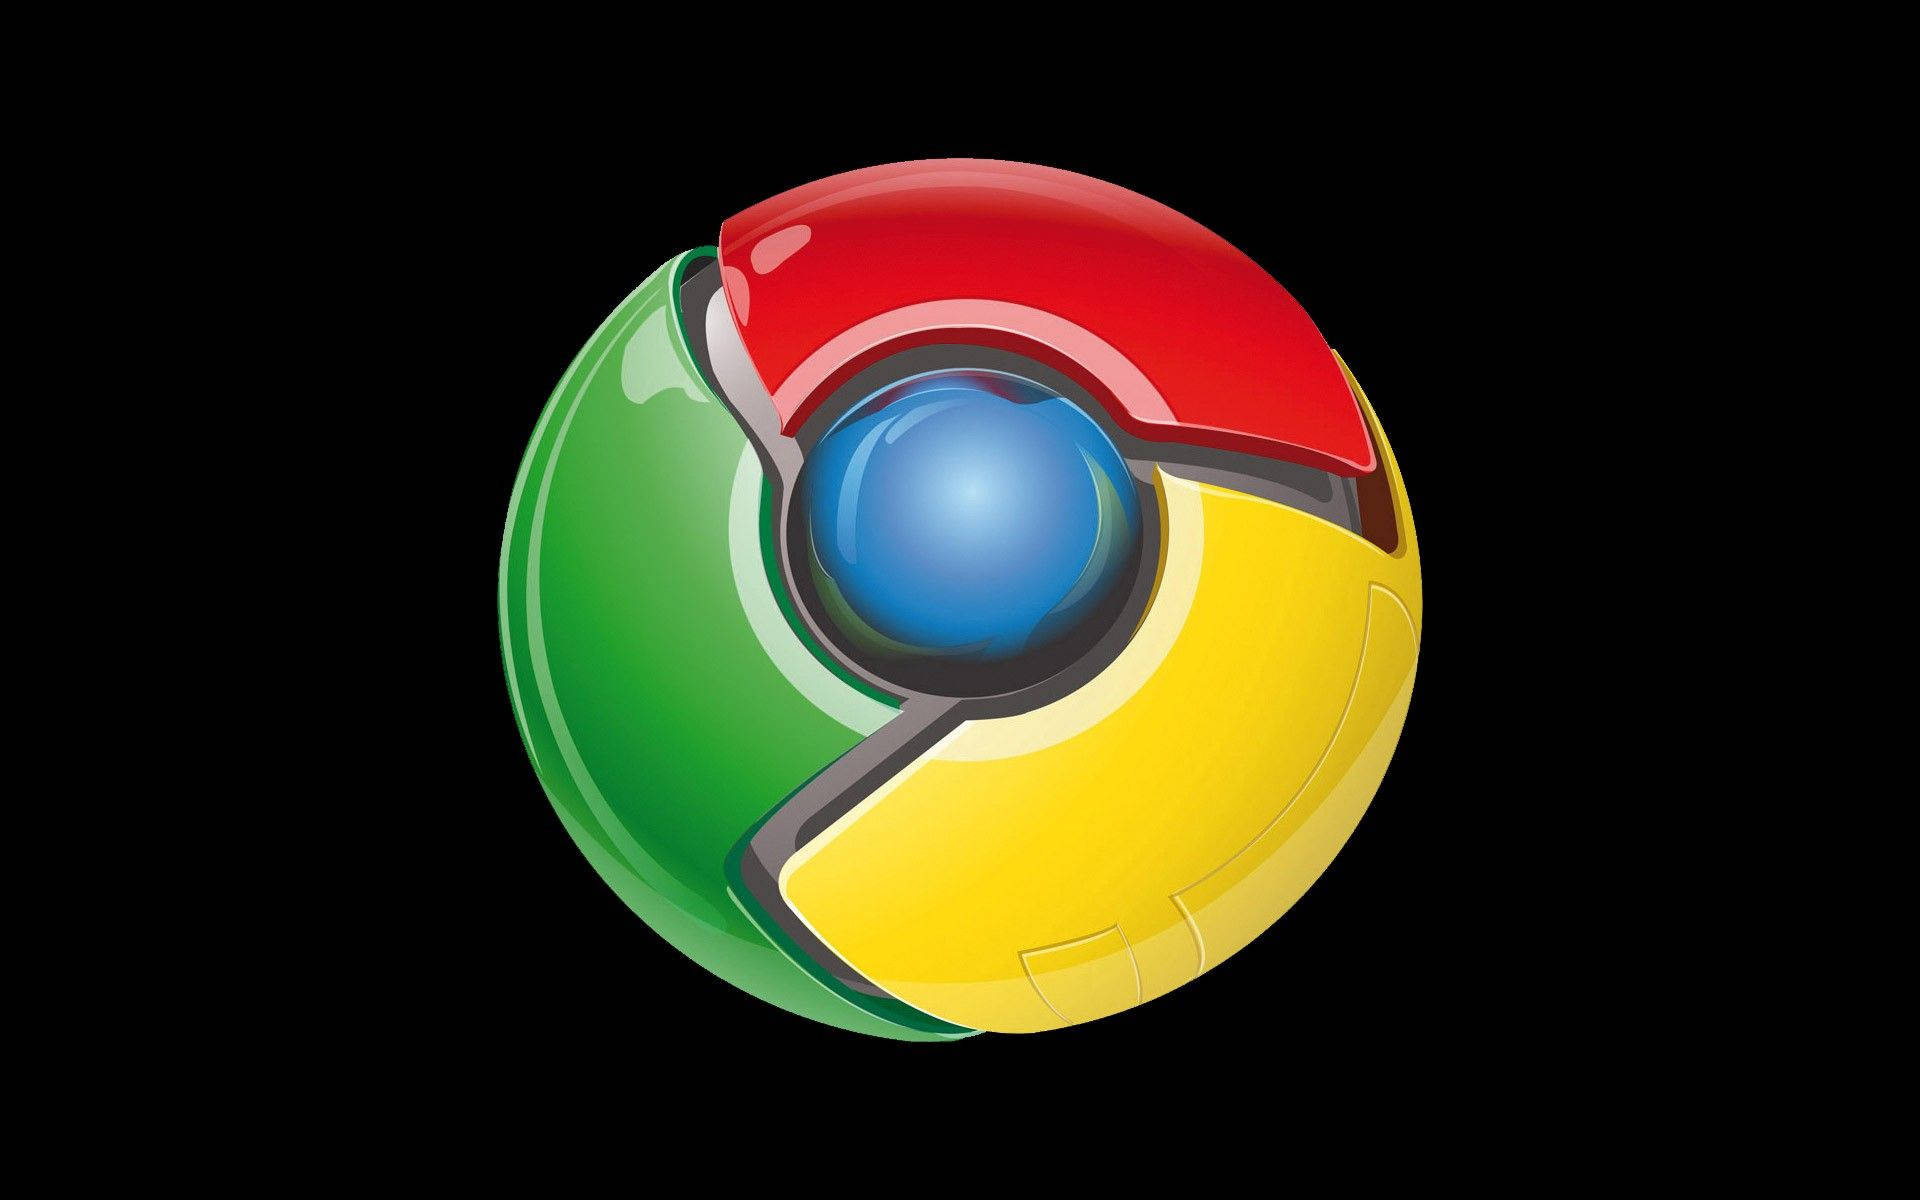 Chrome can now automatically change the New Tab Page background Image daily